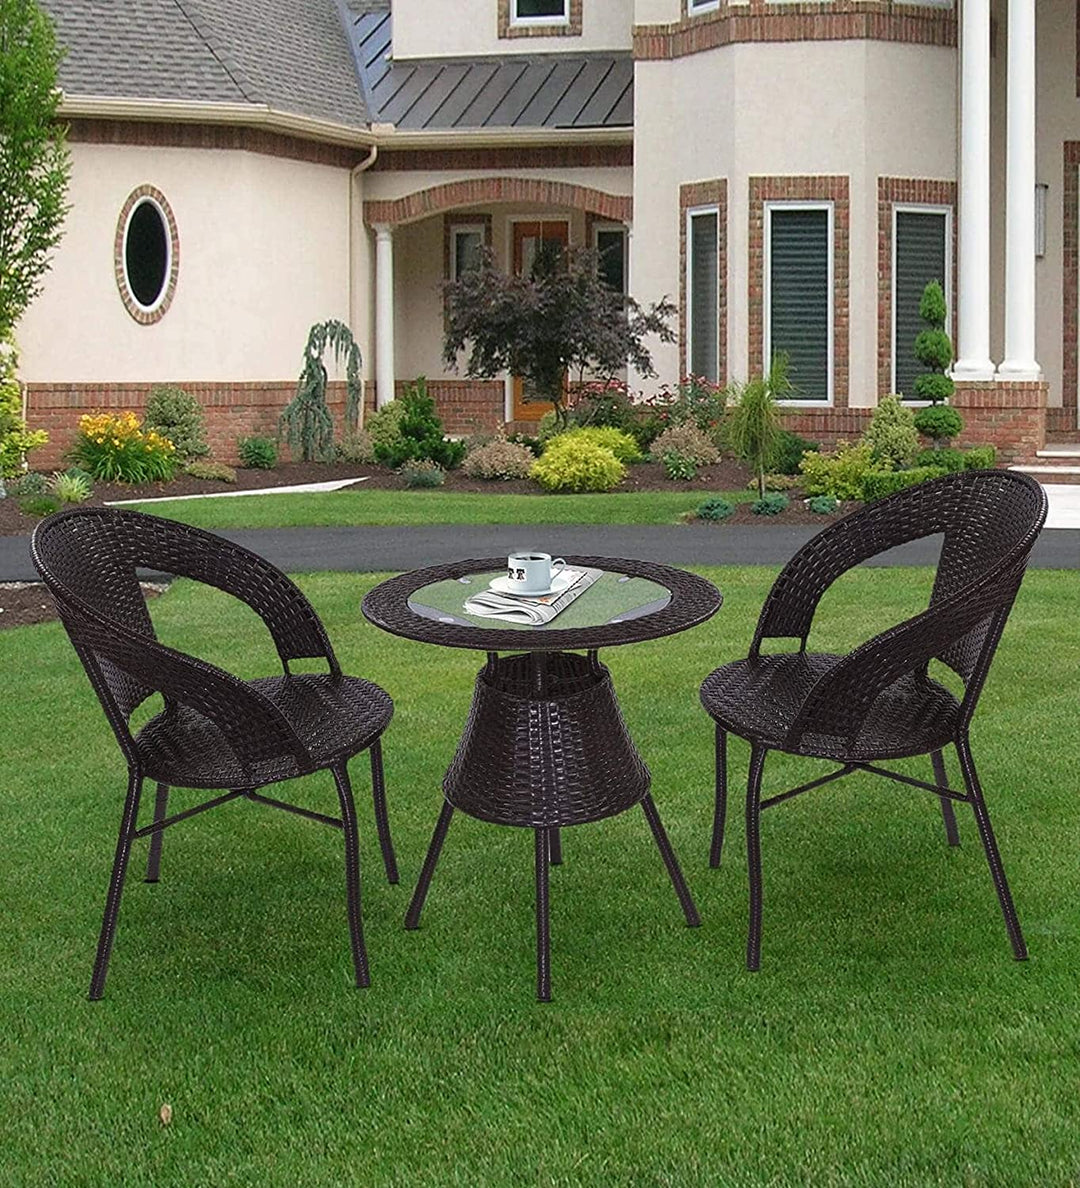 Dreamline Outdoor Garden Patio Seating Set 1+2 2 Chairs and Table Set Balcony Furniture COFFEE TABLE SETS